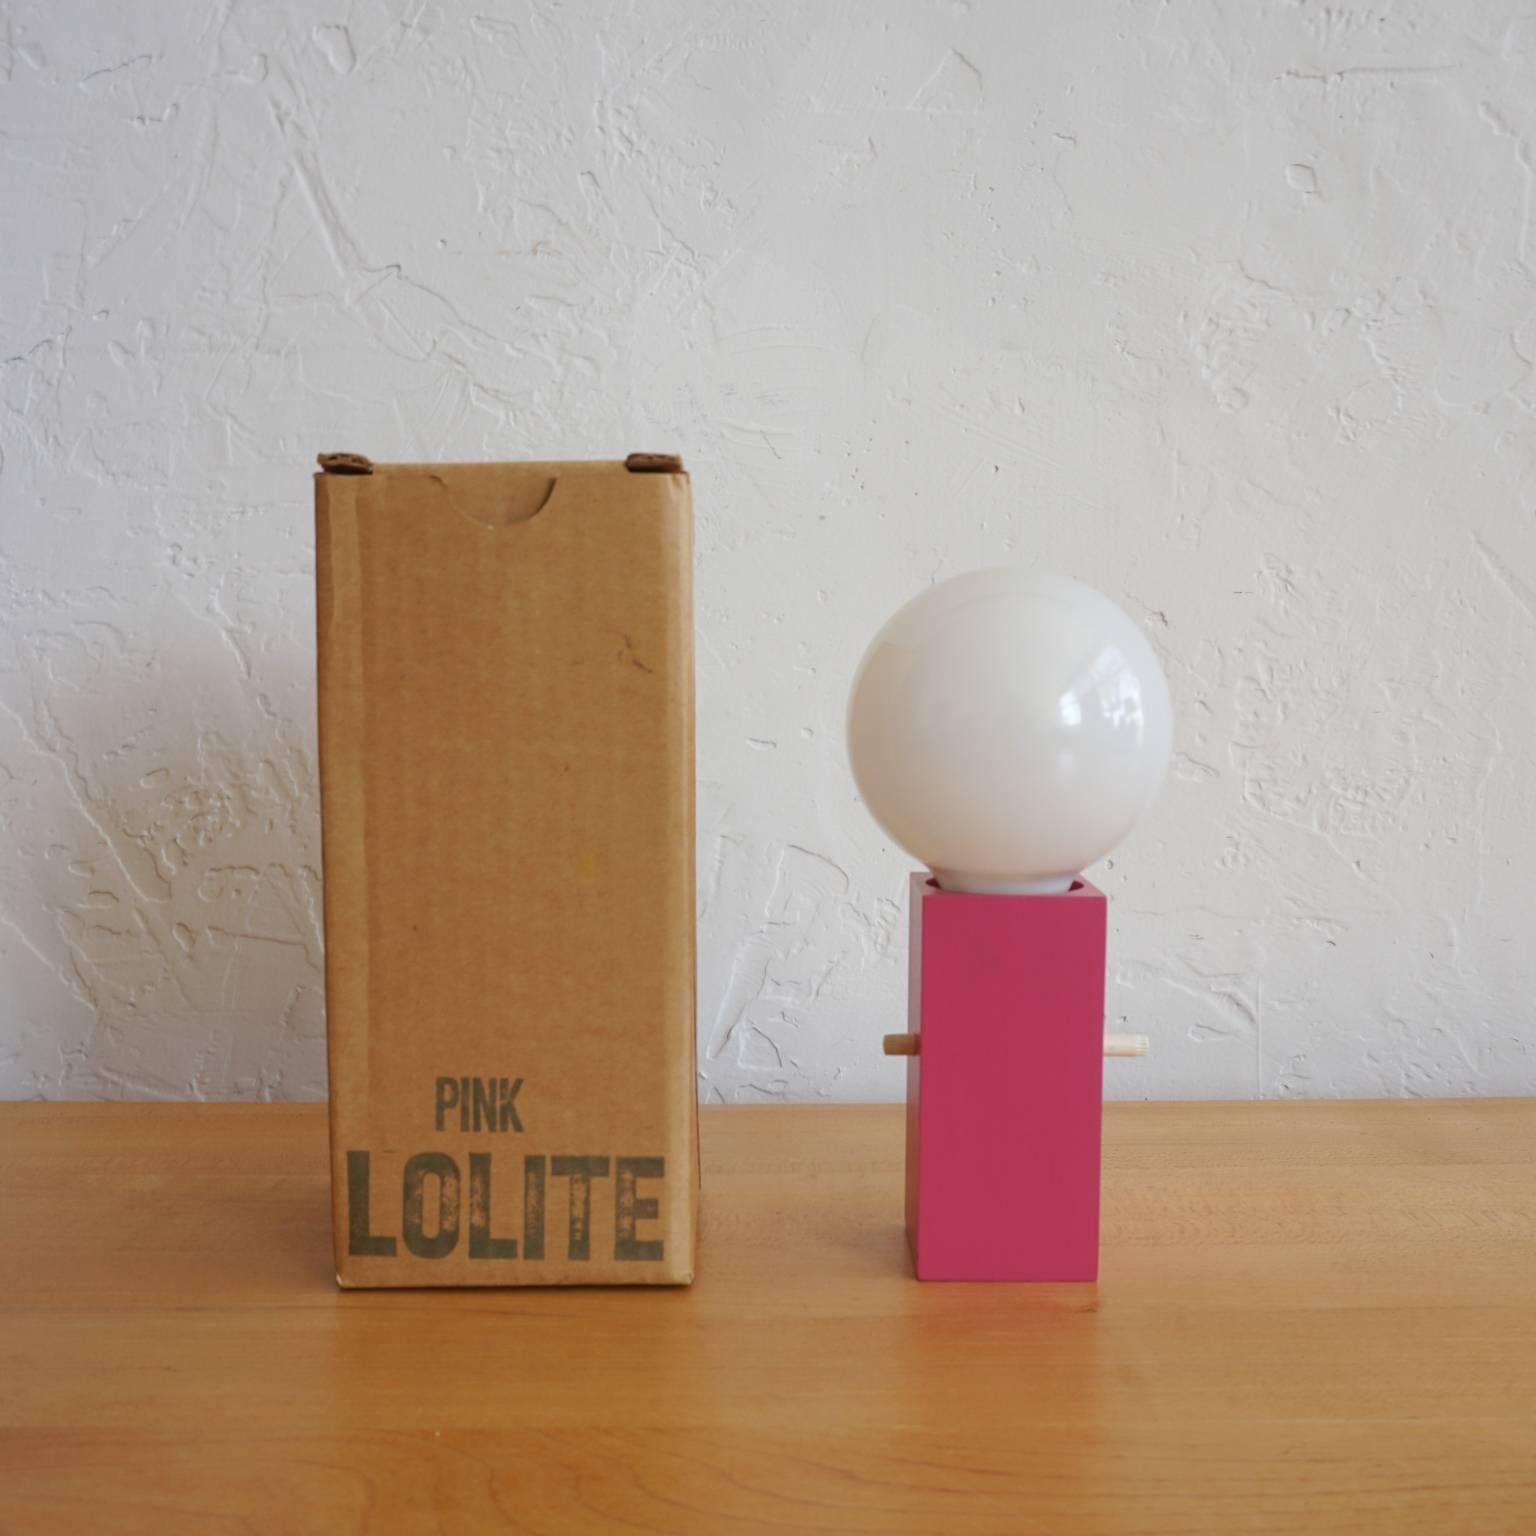 1960s lamp designed by Bill Curry for Design Line. Complete with original packaging. The base is pink painted wood. It appears to be unused.